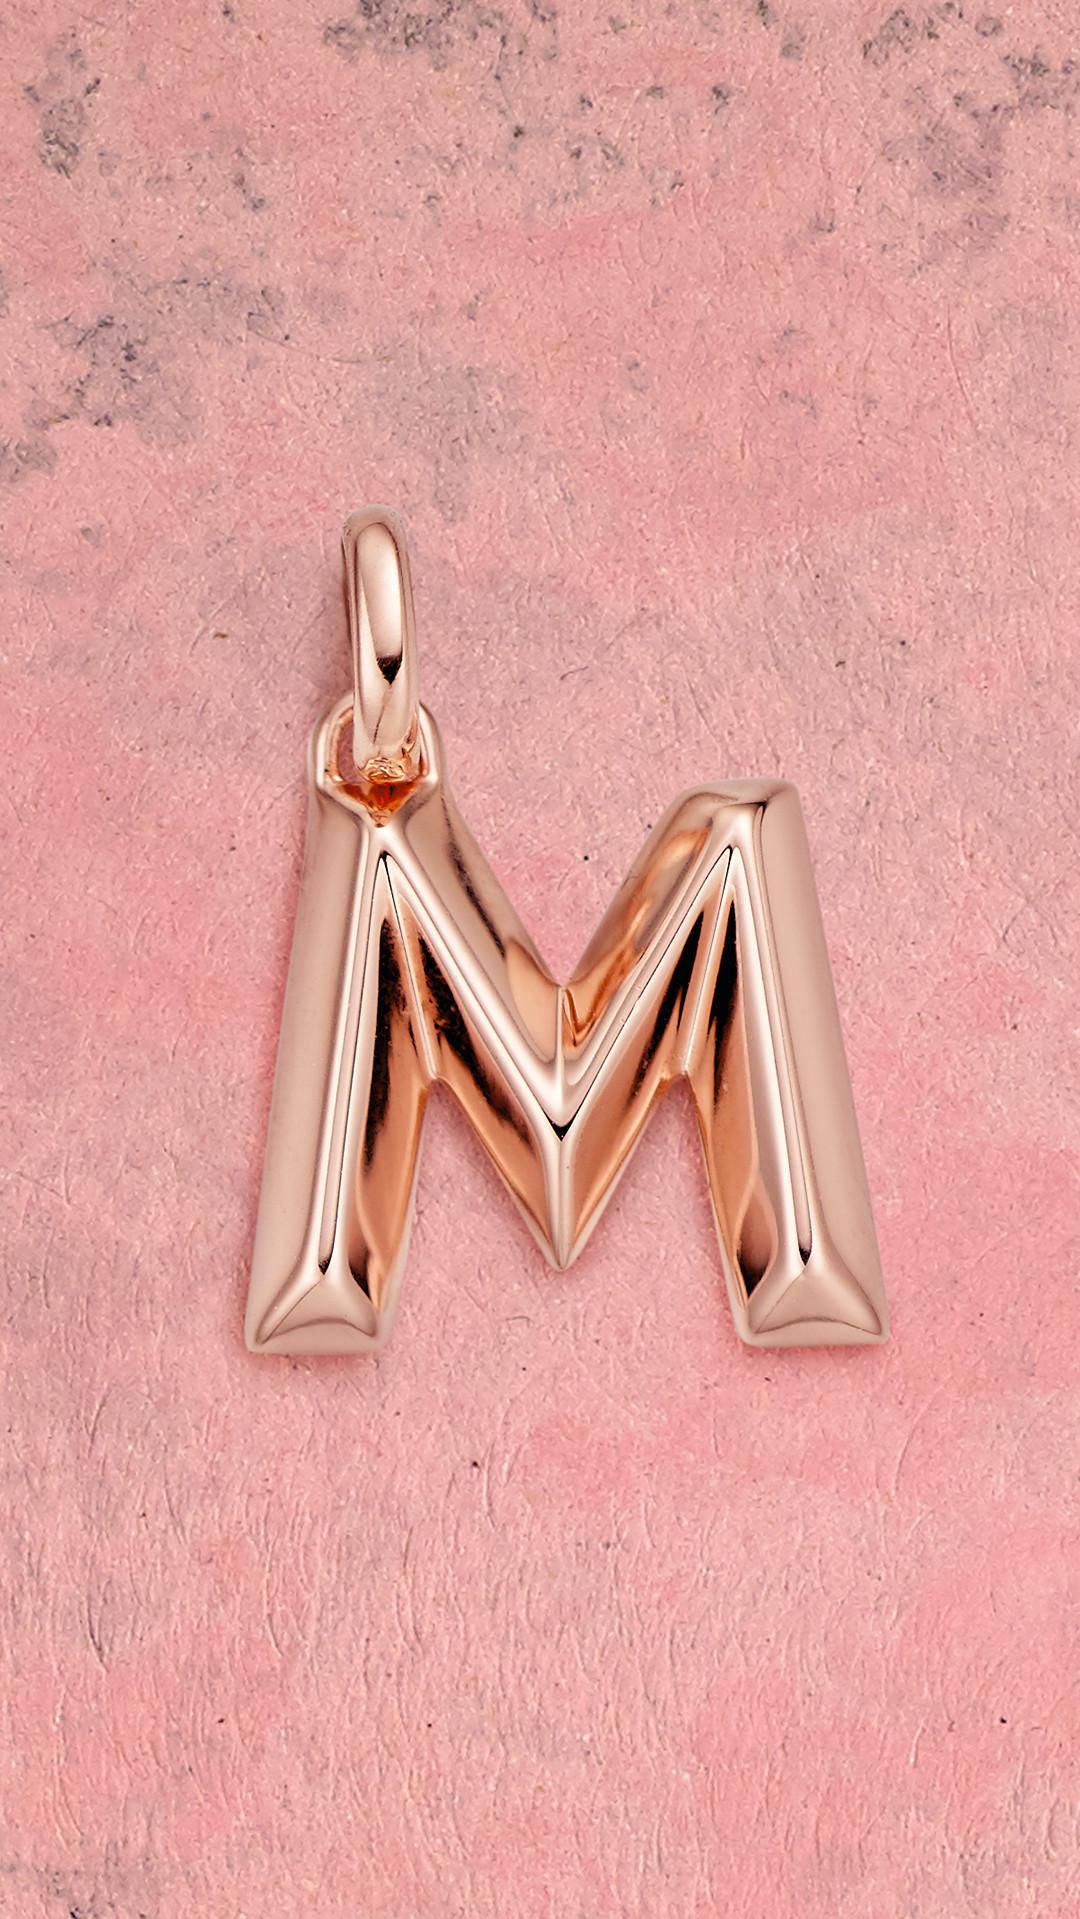 Gold Plated Letter M Wallpaper